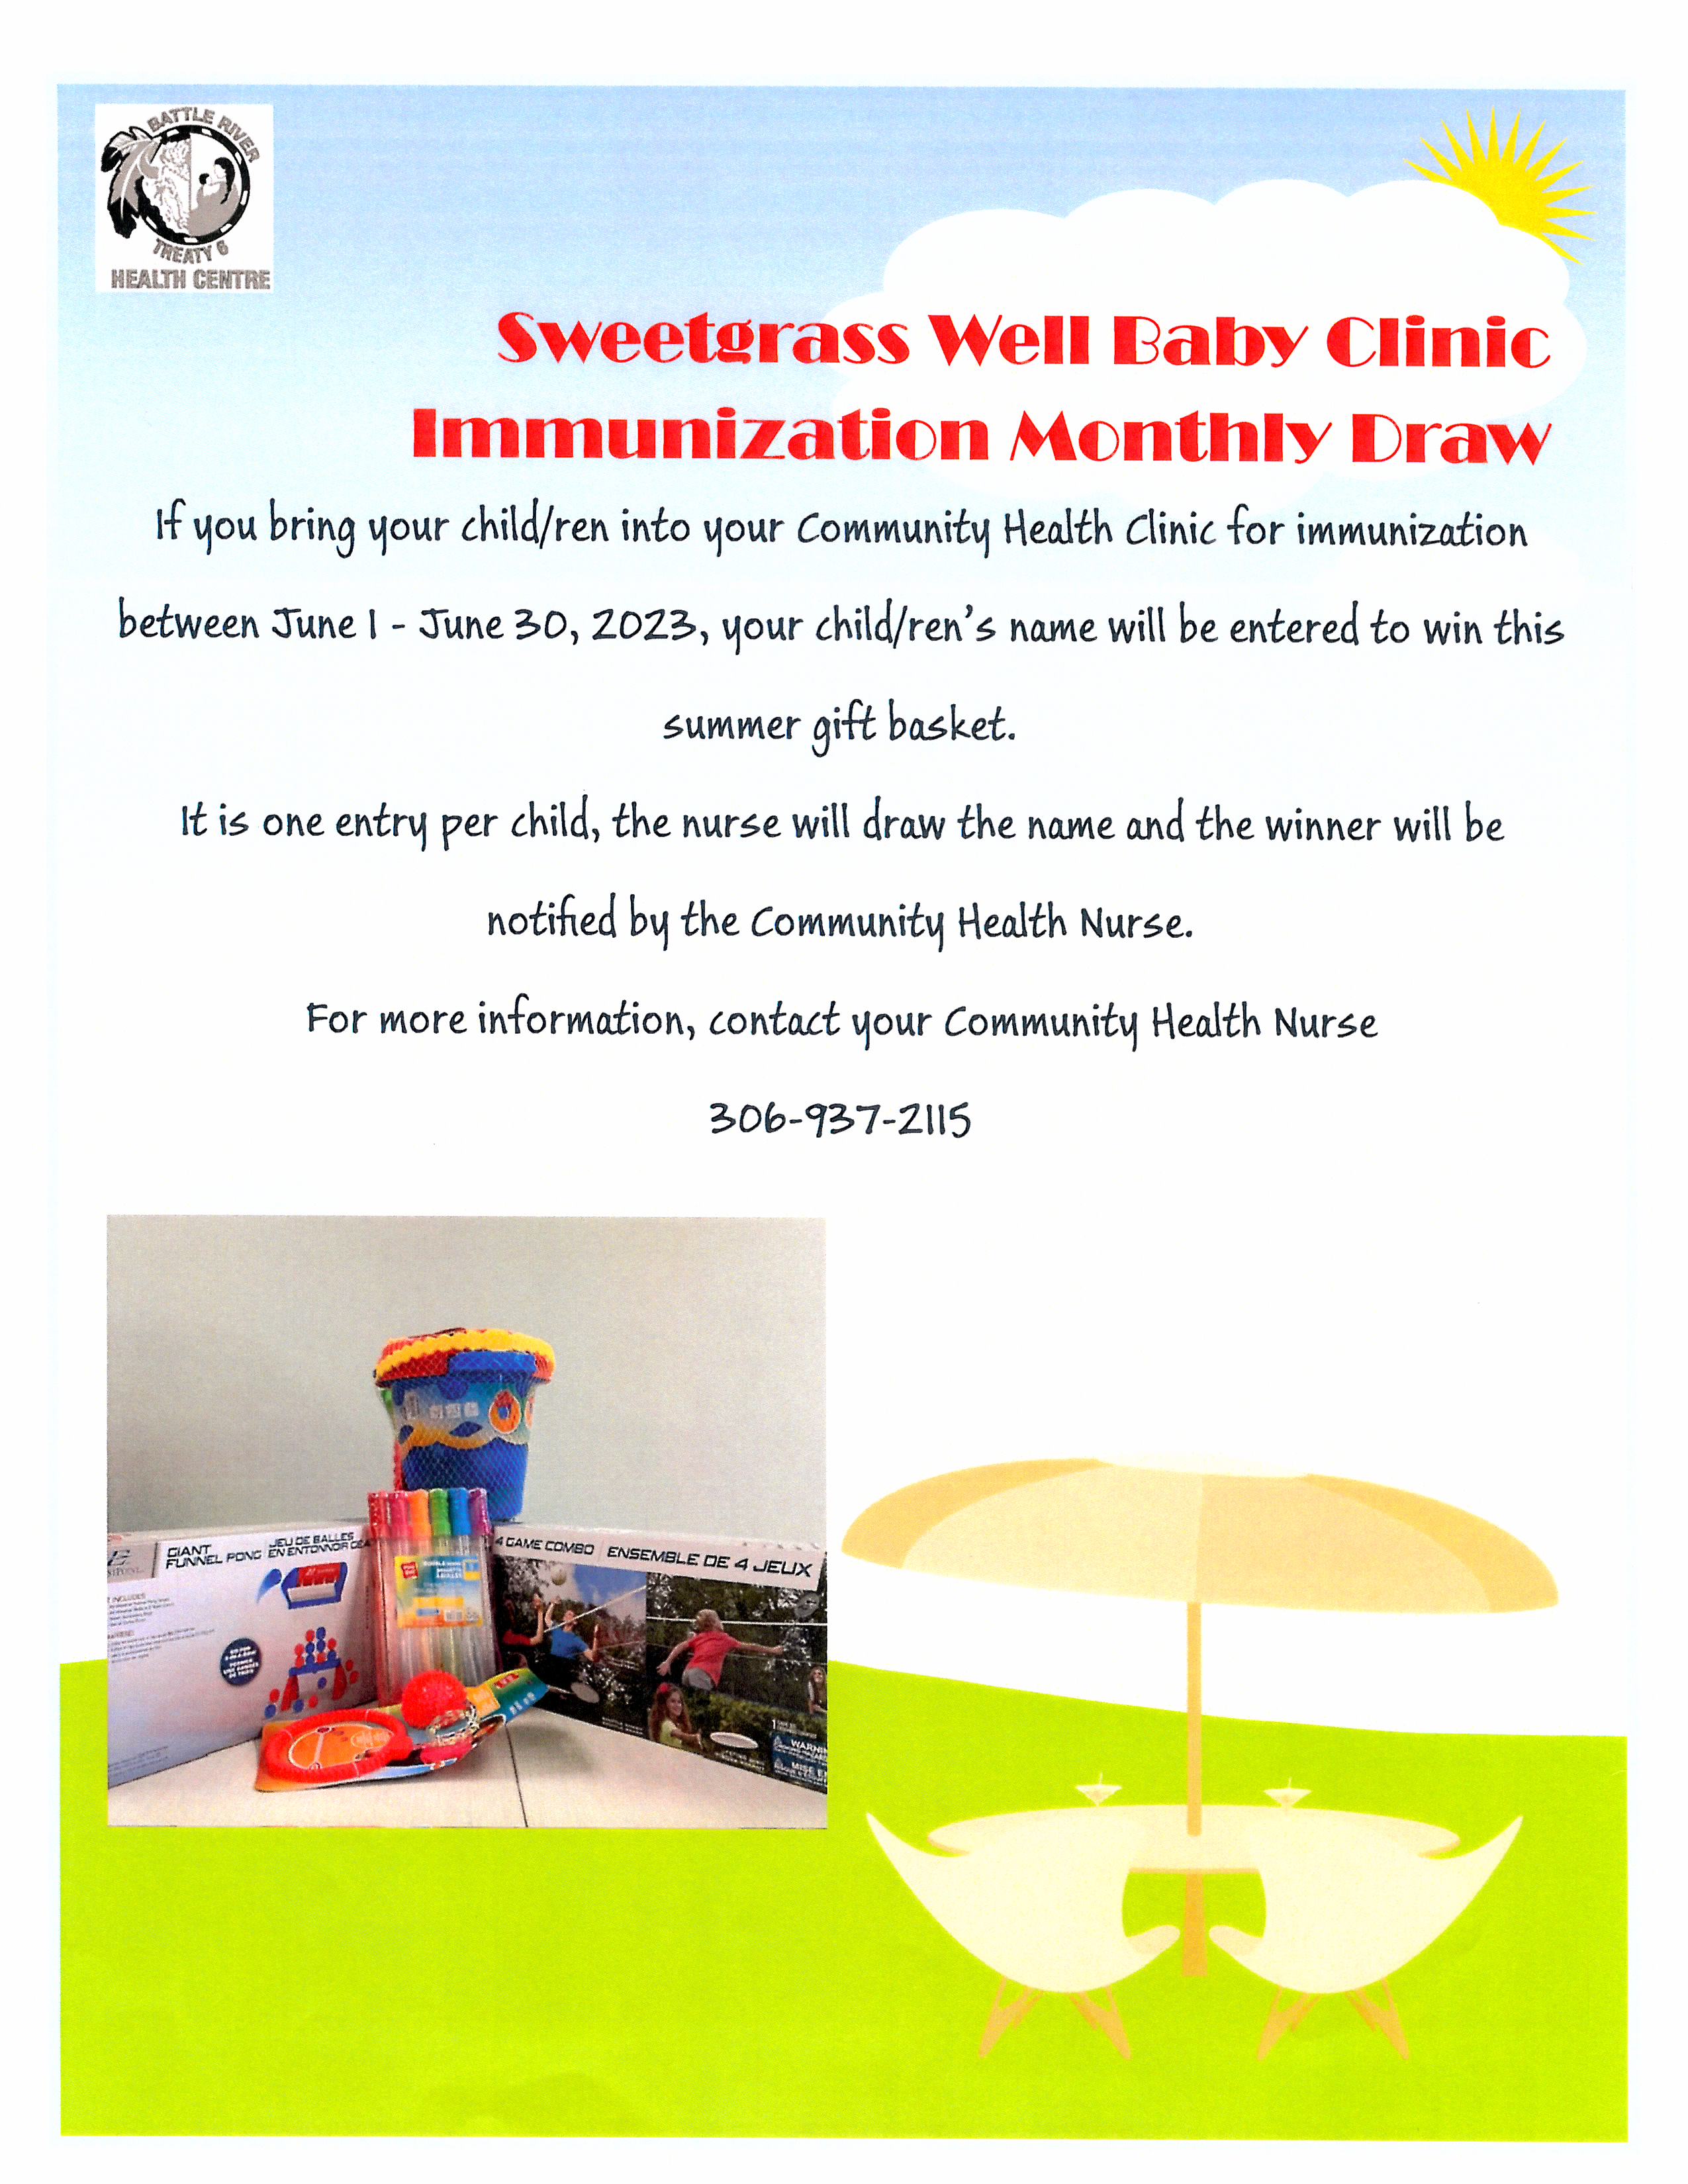 Well Baby Clinic - Monthly Immunization Draw